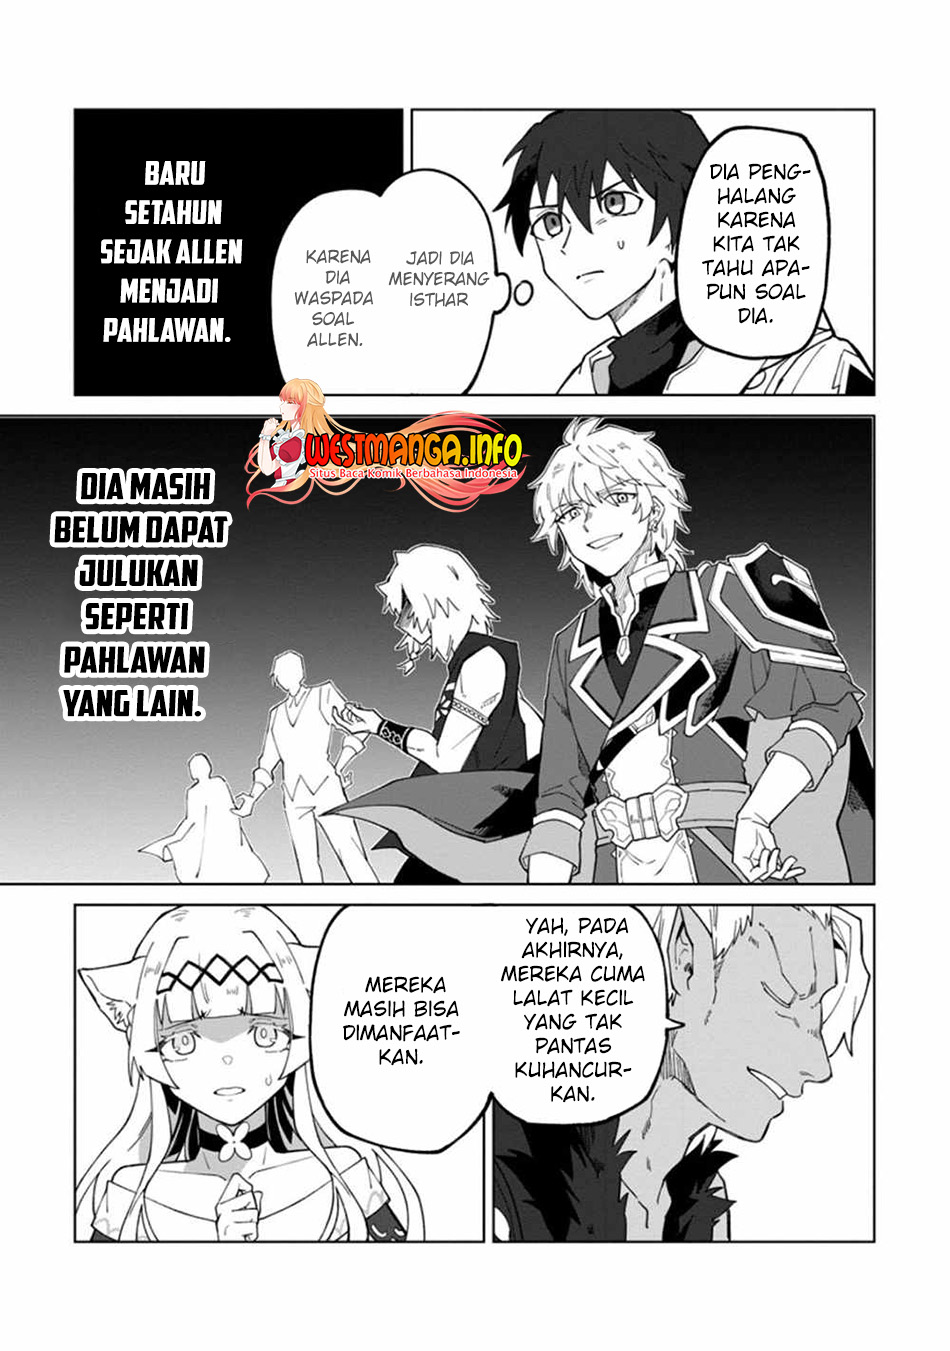 KomiknThe White Mage Who Was Banished From the Hero’s Party Is Picked up by an S Rank Adventurer ~ This White Mage Is Too Out of the Ordinary! Chapter 15